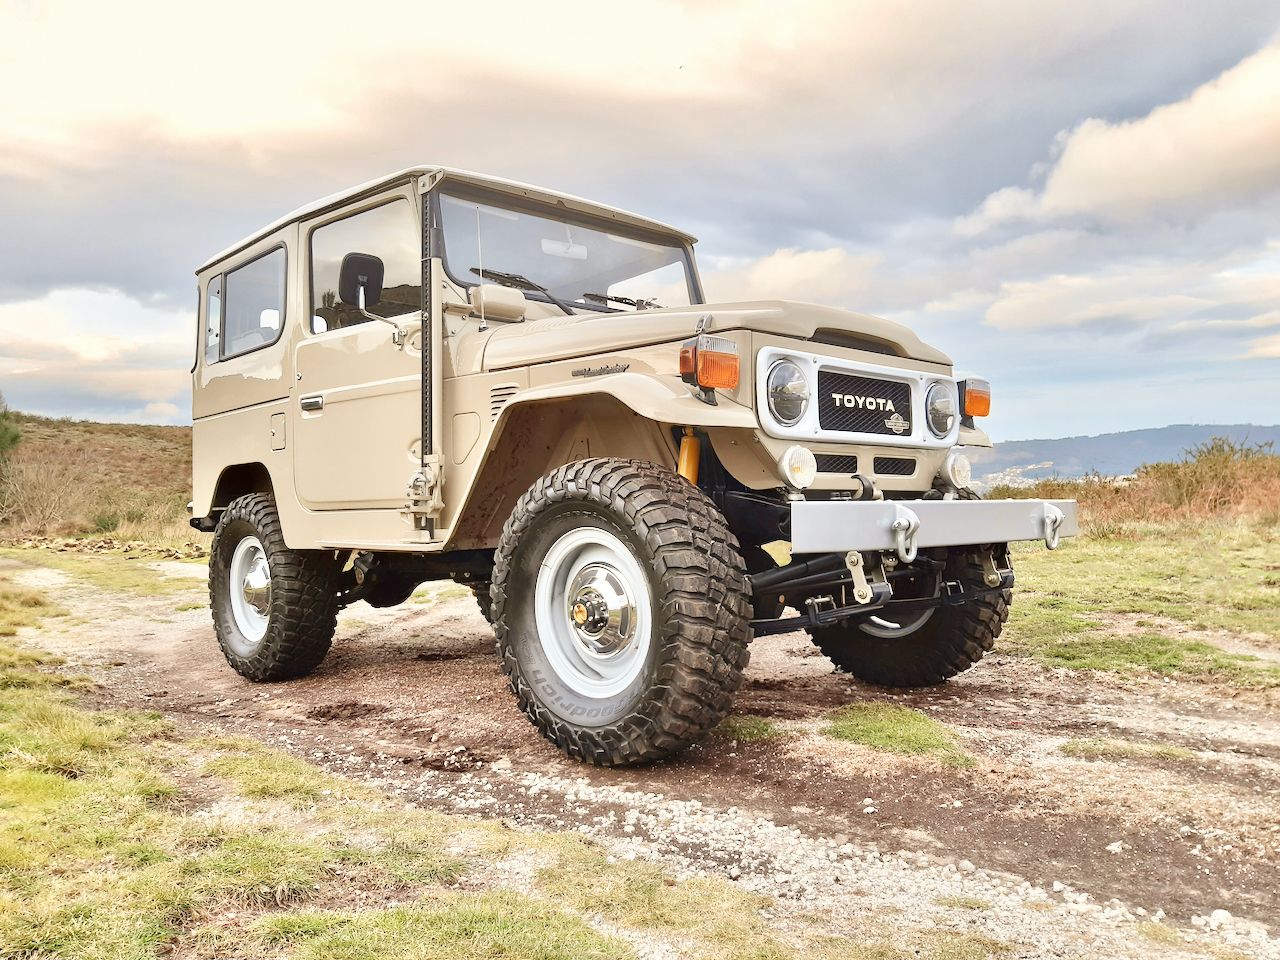 Legacy Overland's Toyota Land Cruiser FJ40 Packs A Punch With GM's 5.7L V8